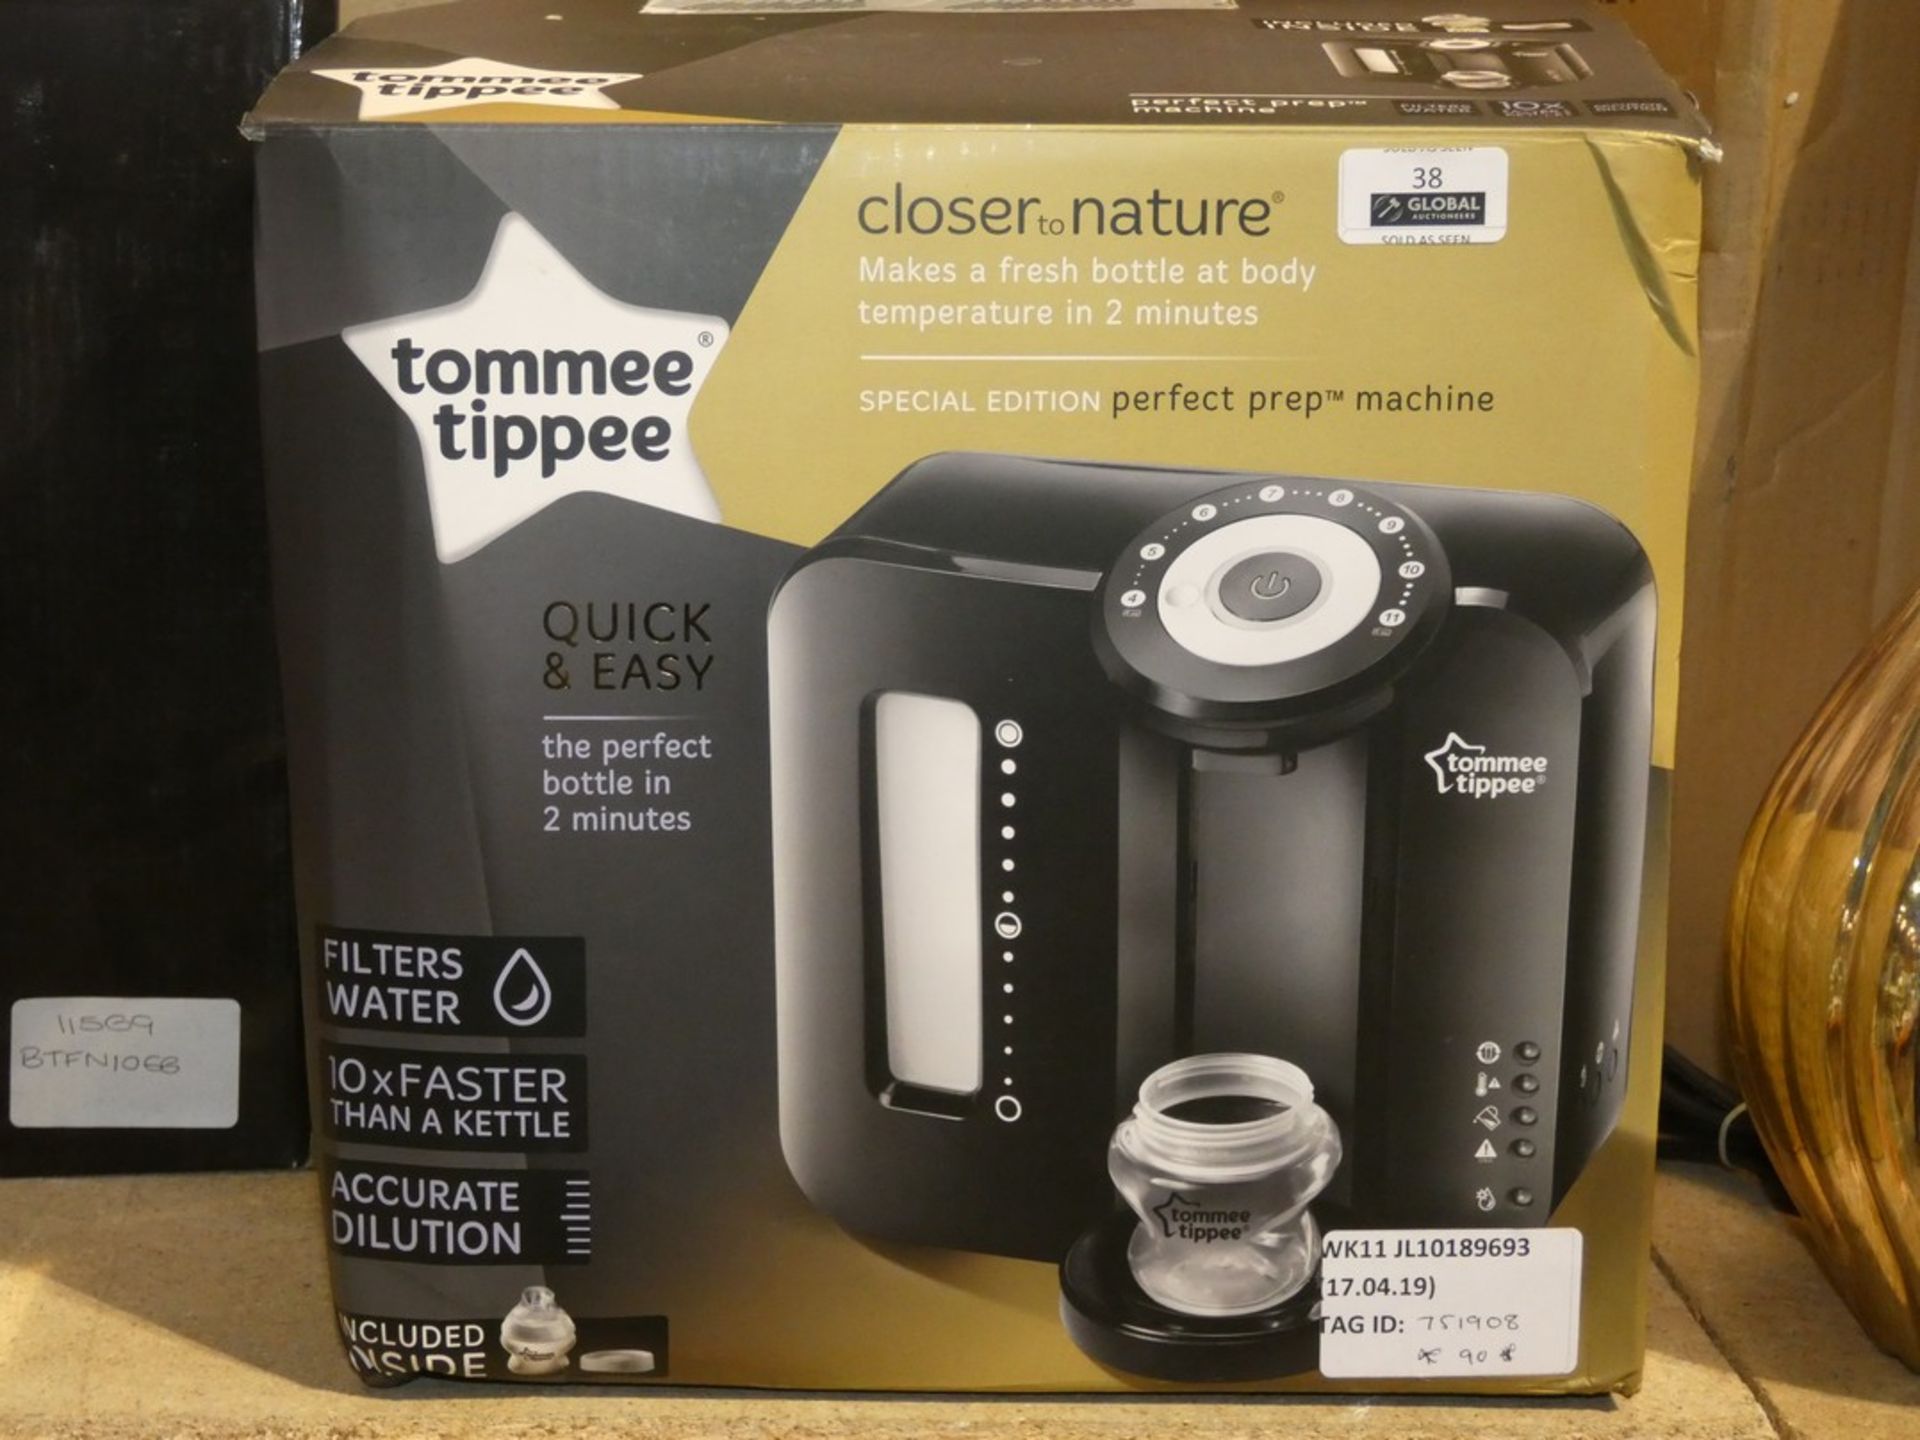 Boxed Tommee Tippee Closer to Nature Prefect Preparation Machine (751908) RRP £90